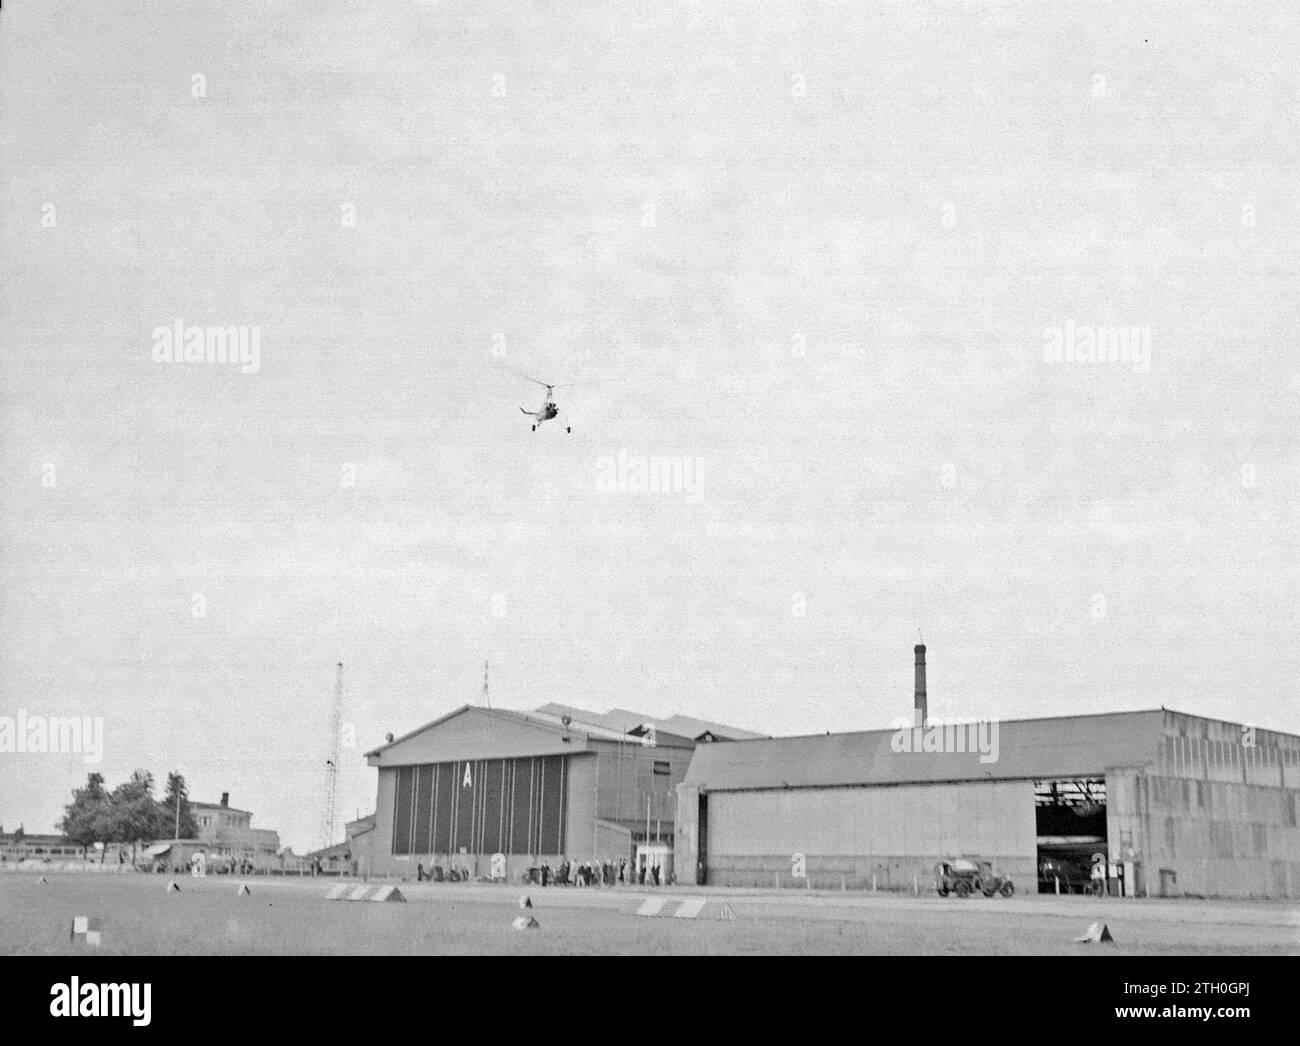 The Cierva autogyro PH-HHH named 'Donna Dulcinea' of the Netherlands Aviation School flying above the hangars of Rotterdam Waalhaven Airport ca. 1935 Stock Photo